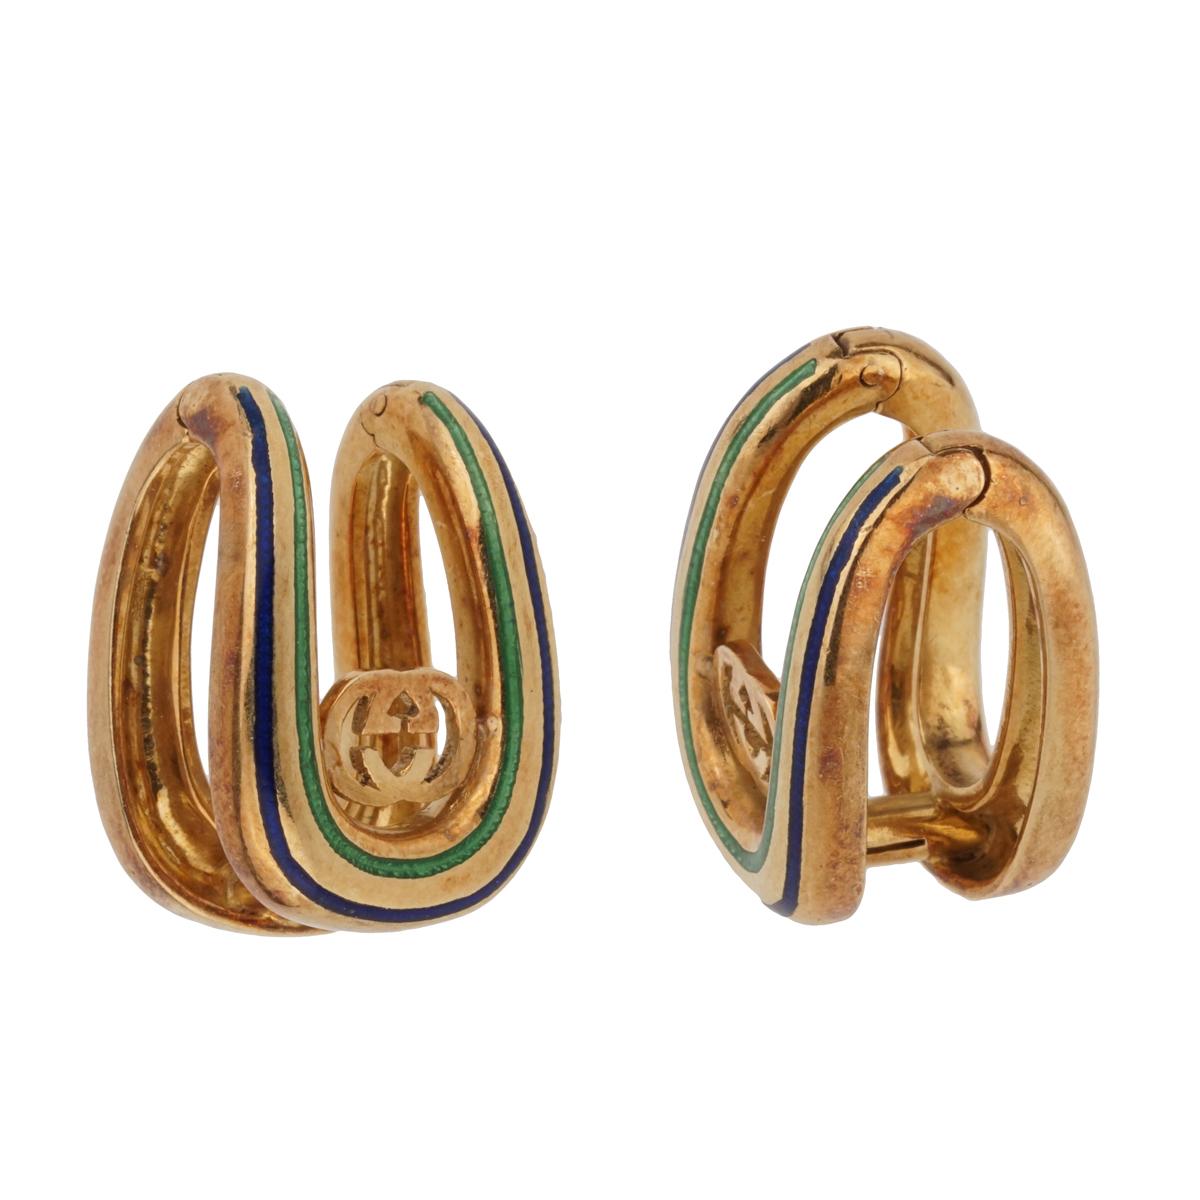 An amazing pair of vintage Gucci cuff links circa 1970's laced with blue and green enamel and the iconic double G motif in 18k yellow gold. The earrings are in original condition, and have not been polished in order to maintain the lovely patina.